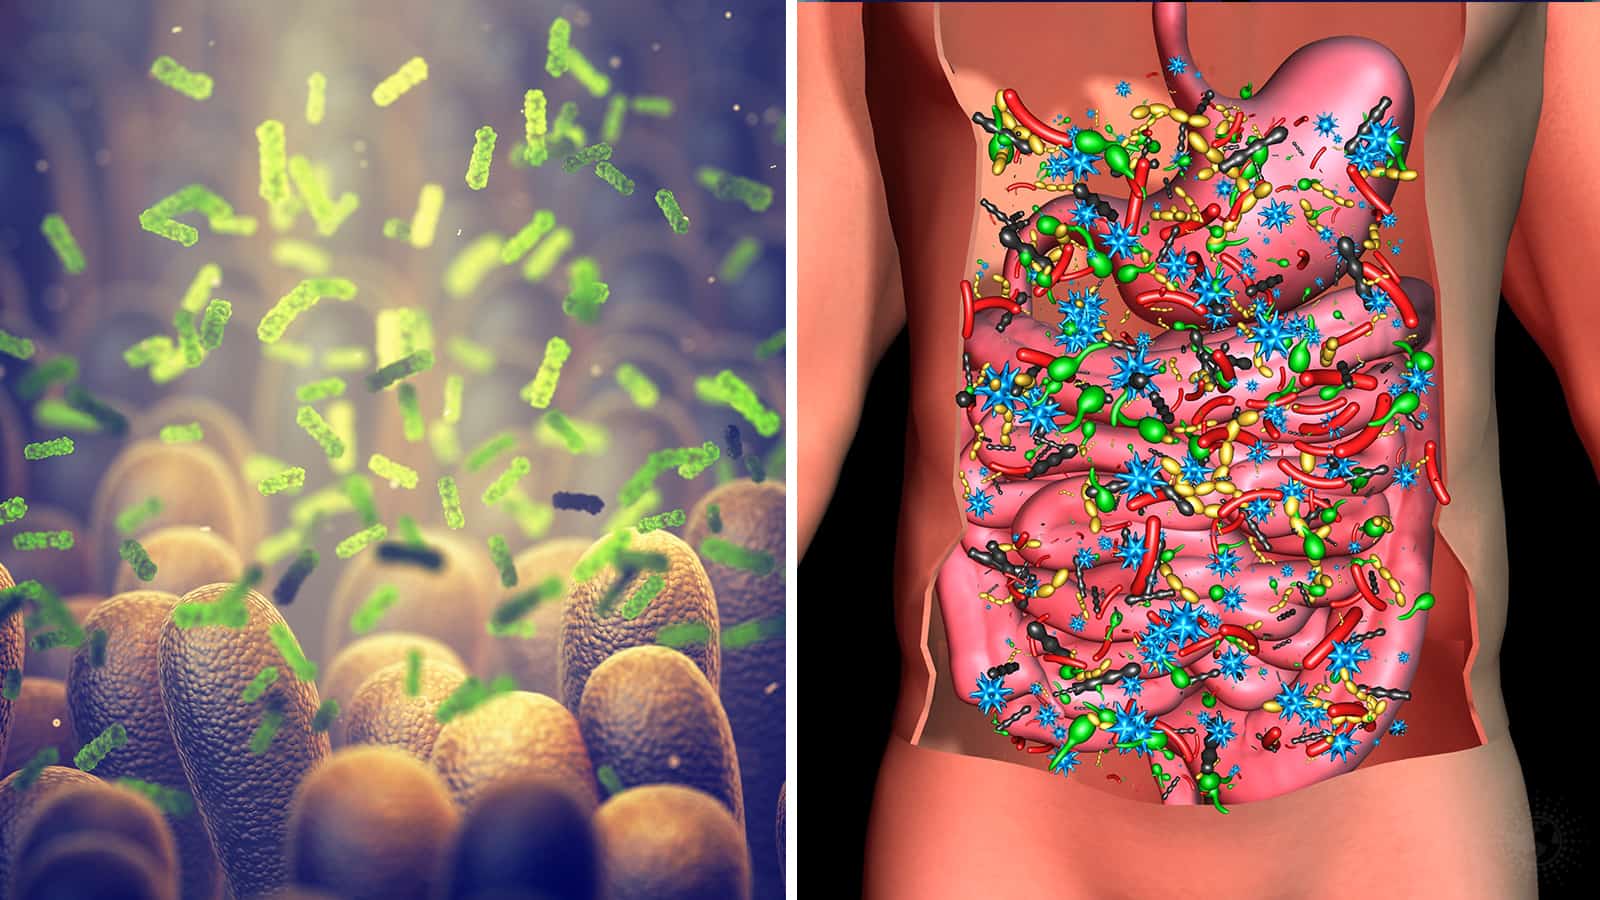 Researchers Discover Over 142,000 Virus Species in the Gut Microbiome